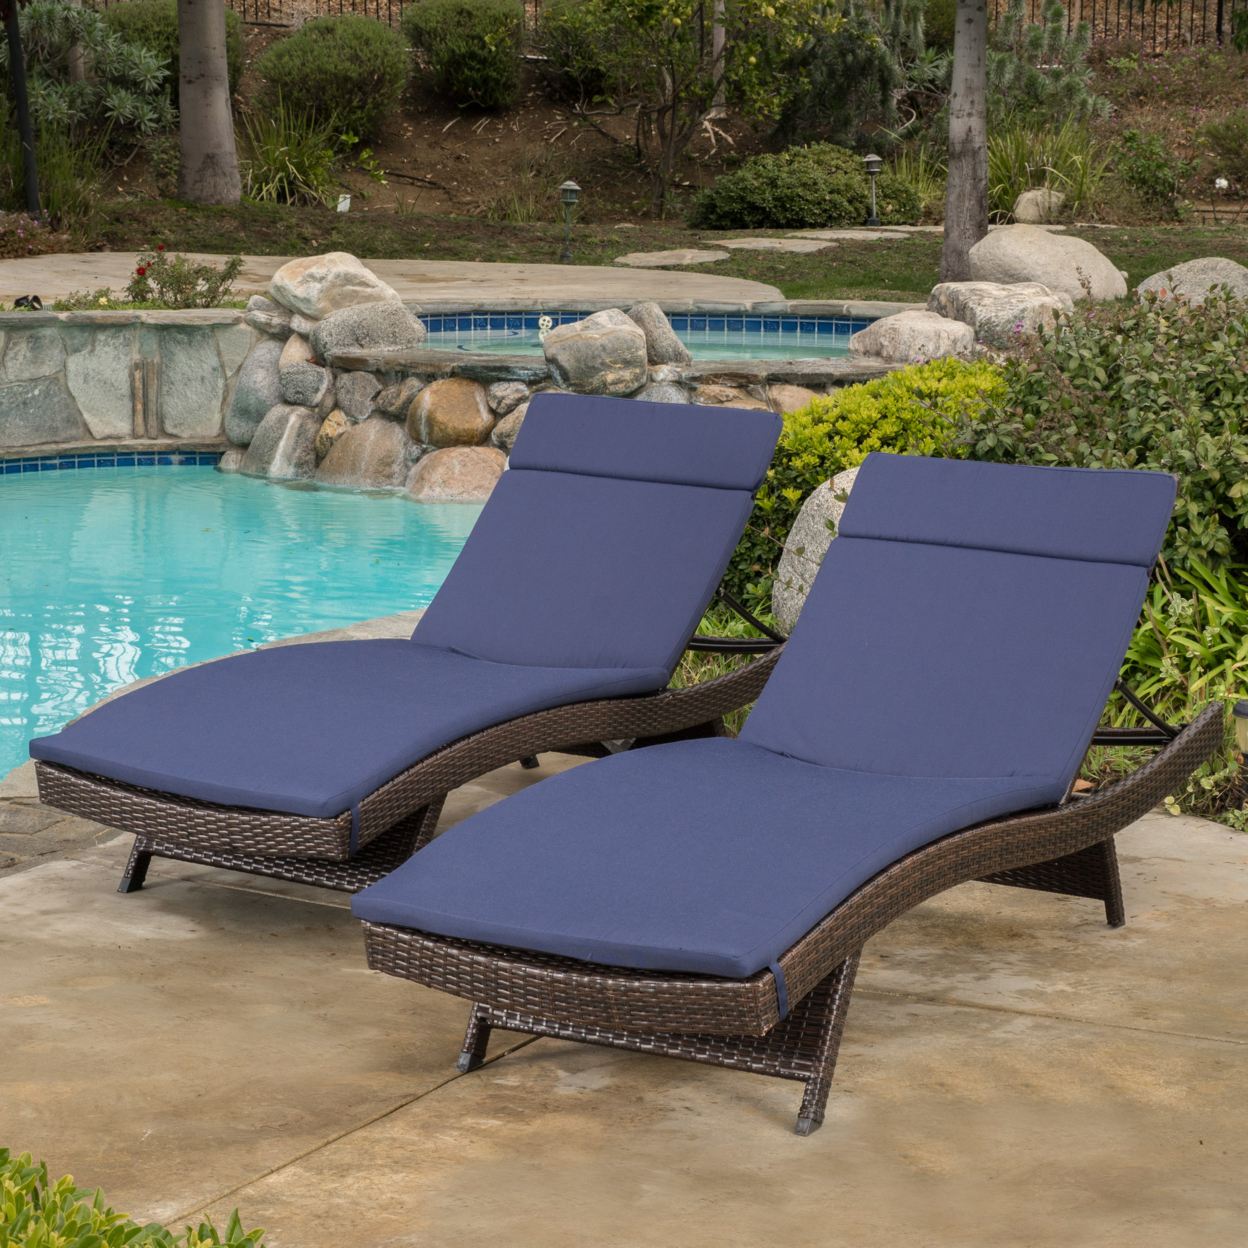 Lakeport Outdoor Adjustable Chaise Lounge Chairs With Cushions (set Of 2) - Jungle Green Cushion